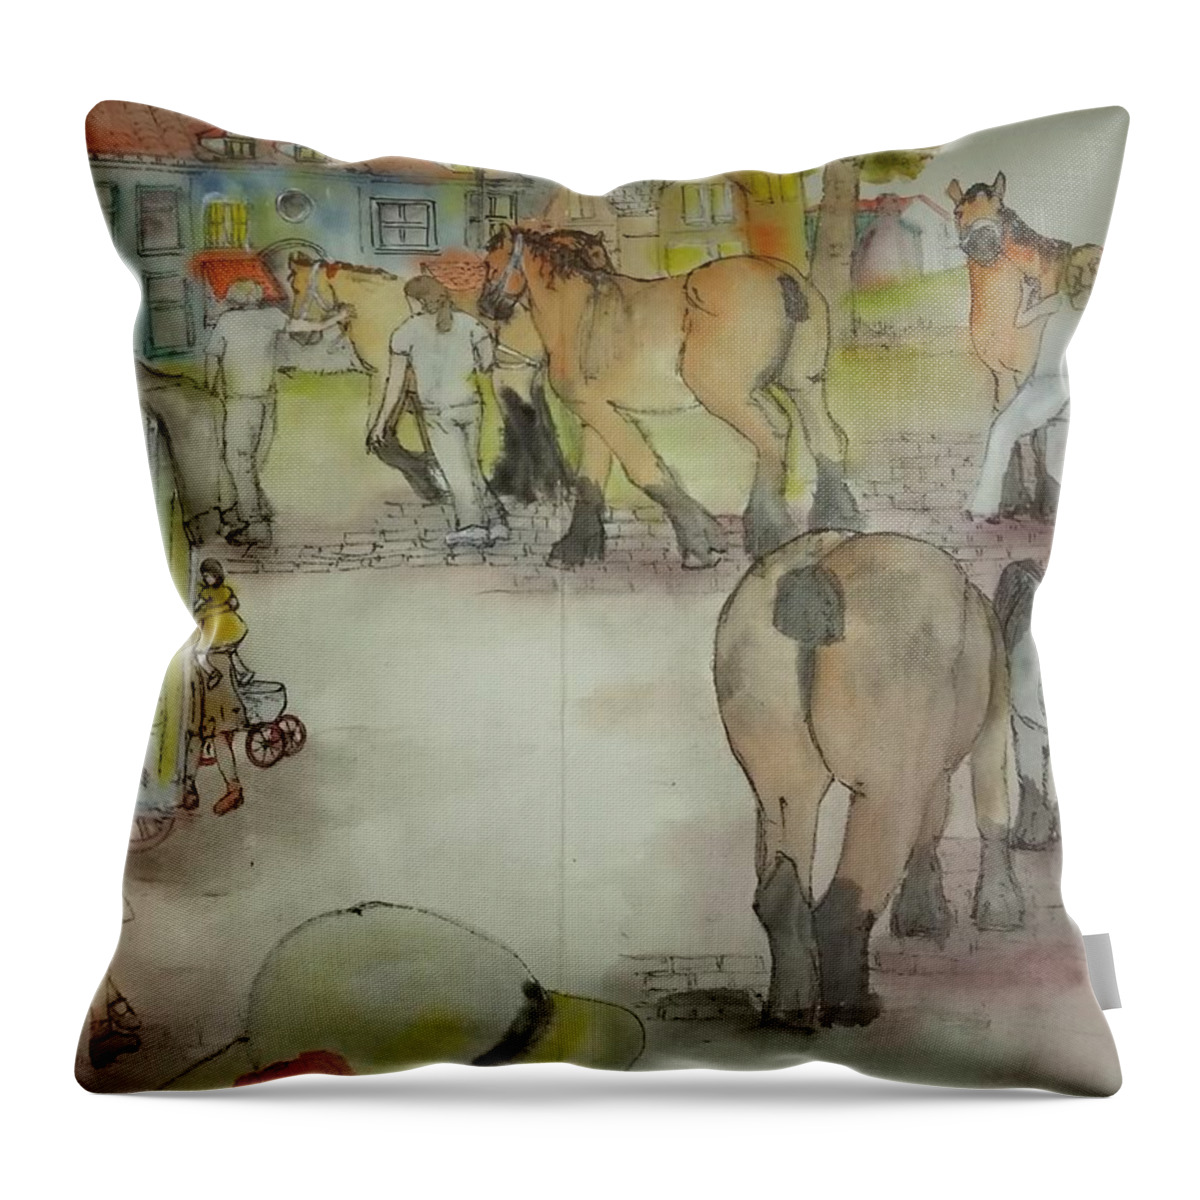 The Netherlands. Cityscape. Equine. Figures . Horse Auction. Livestock. Children Throw Pillow featuring the painting Tulips clogs and windmills albumthe Netherlands. Cityscape, annual by Debbi Saccomanno Chan